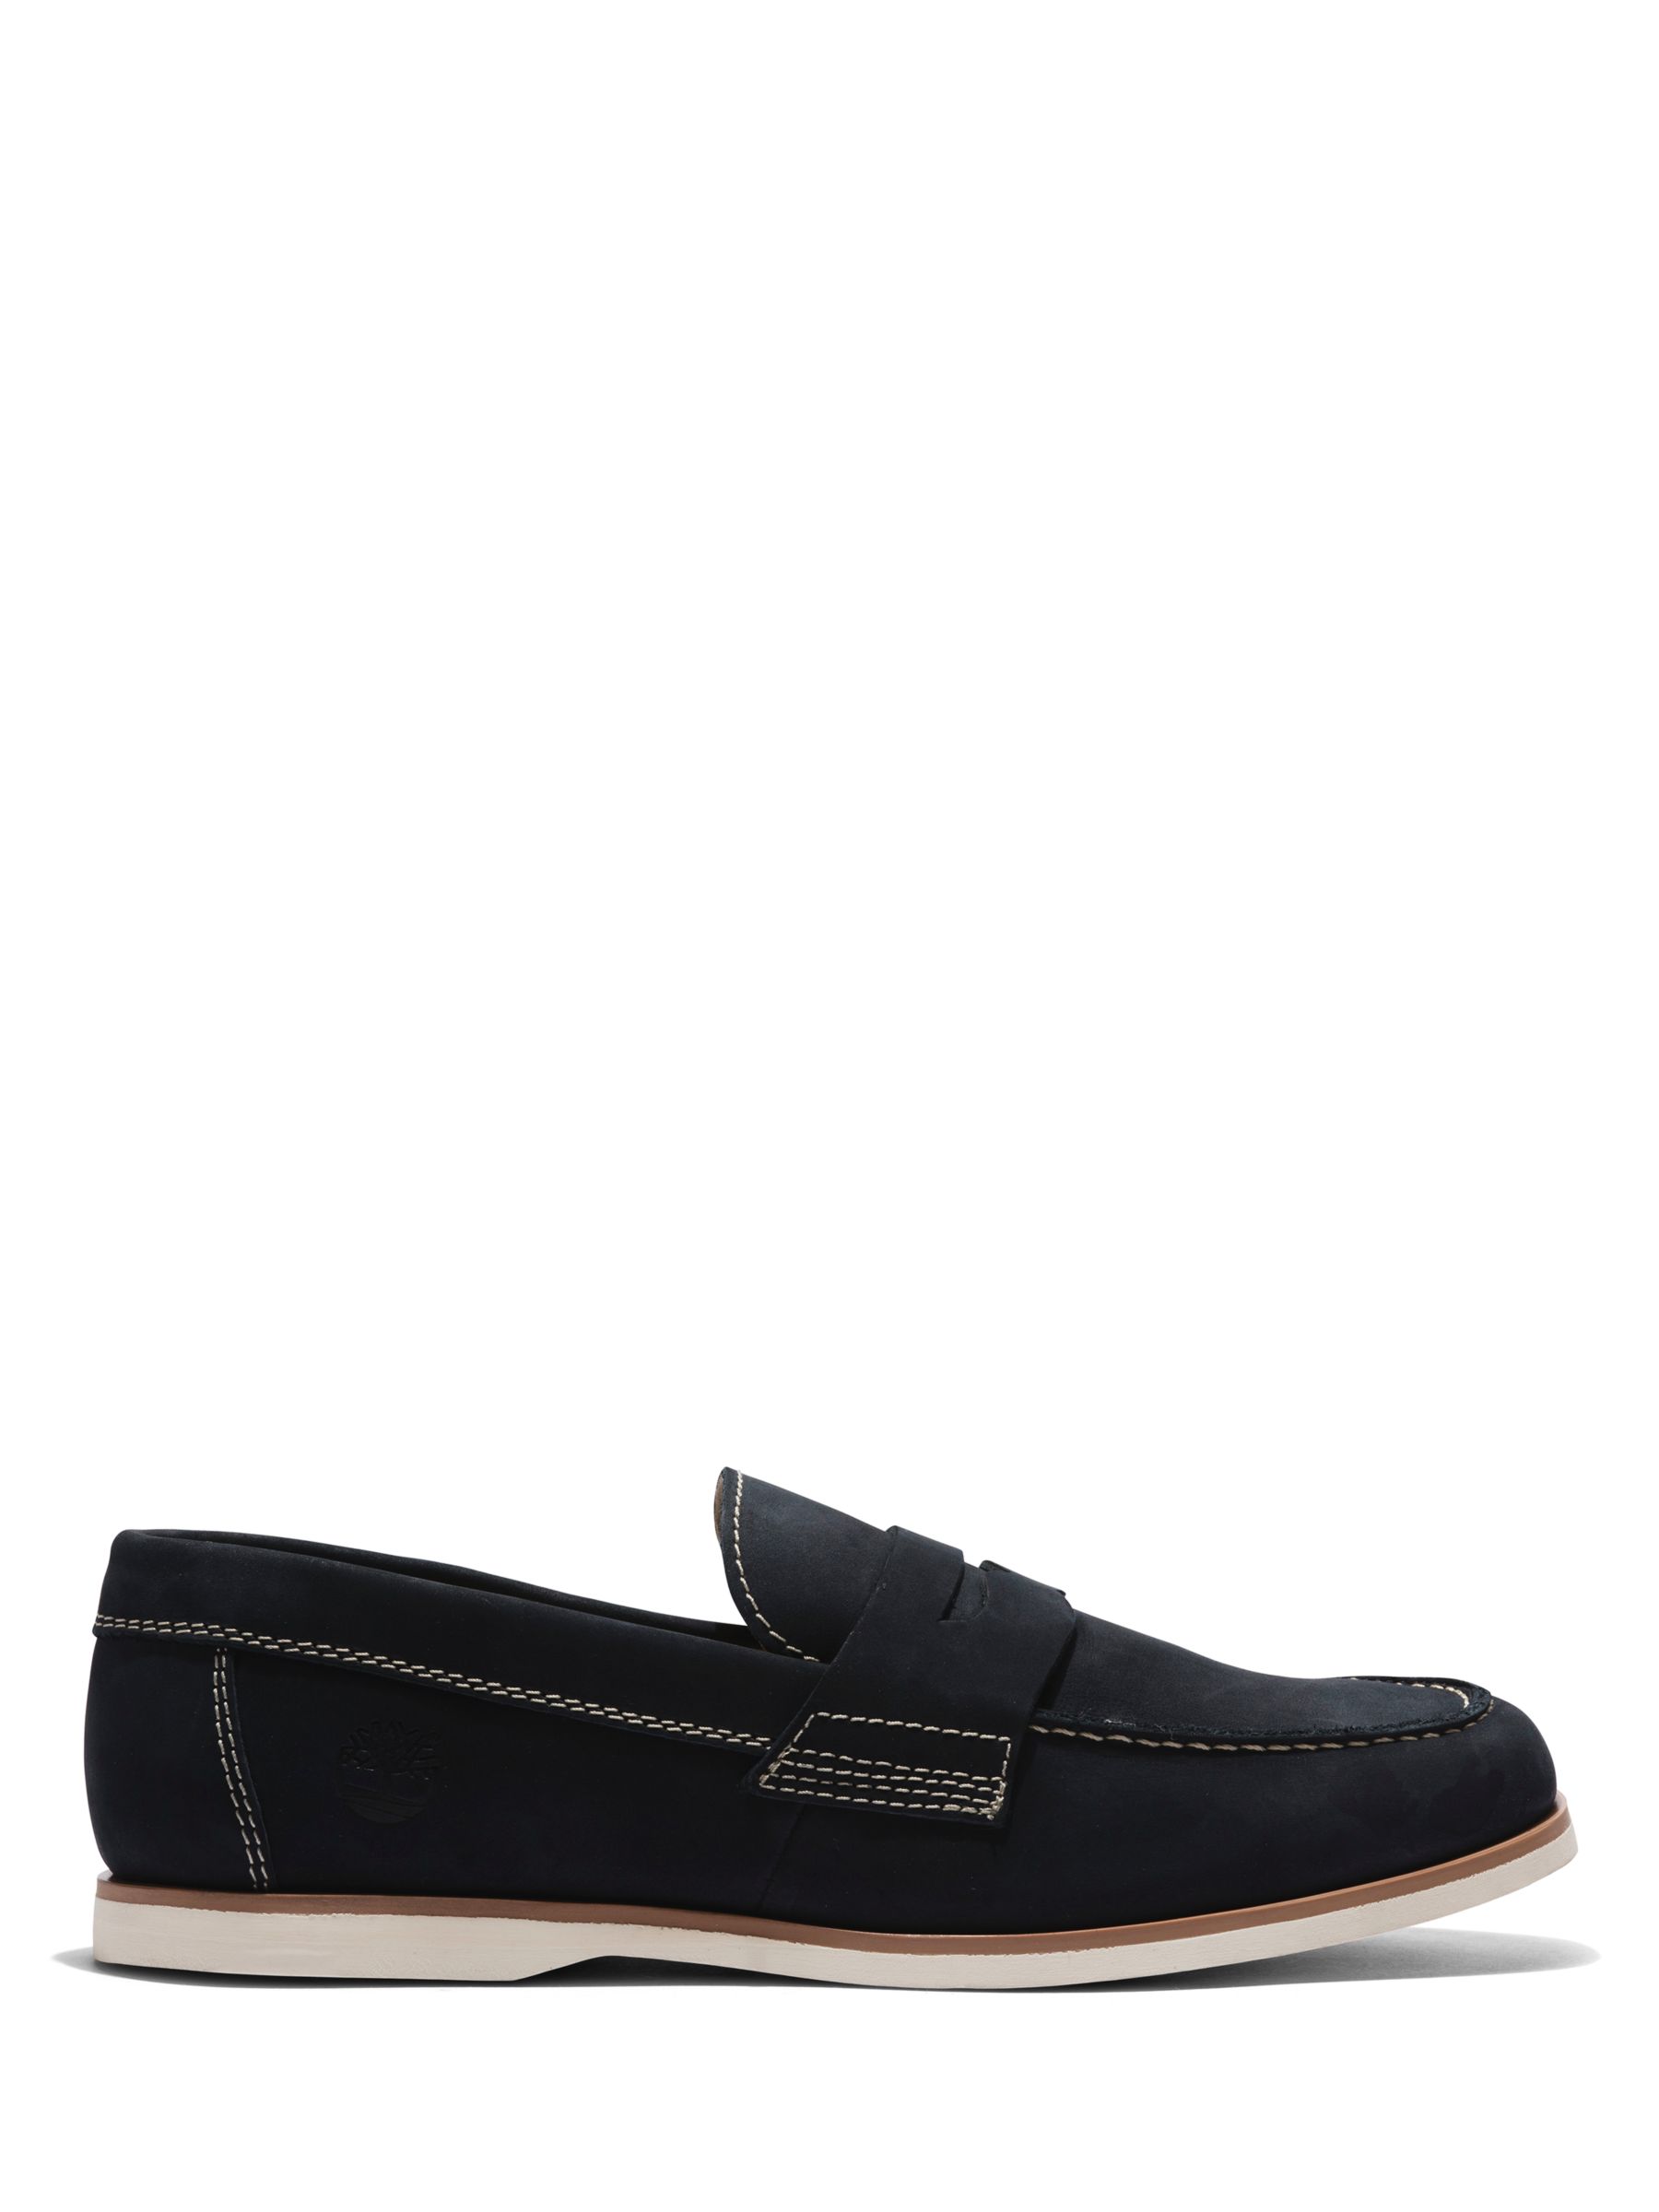 Timberland Venetian Suede Loafers, Navy at John Lewis & Partners